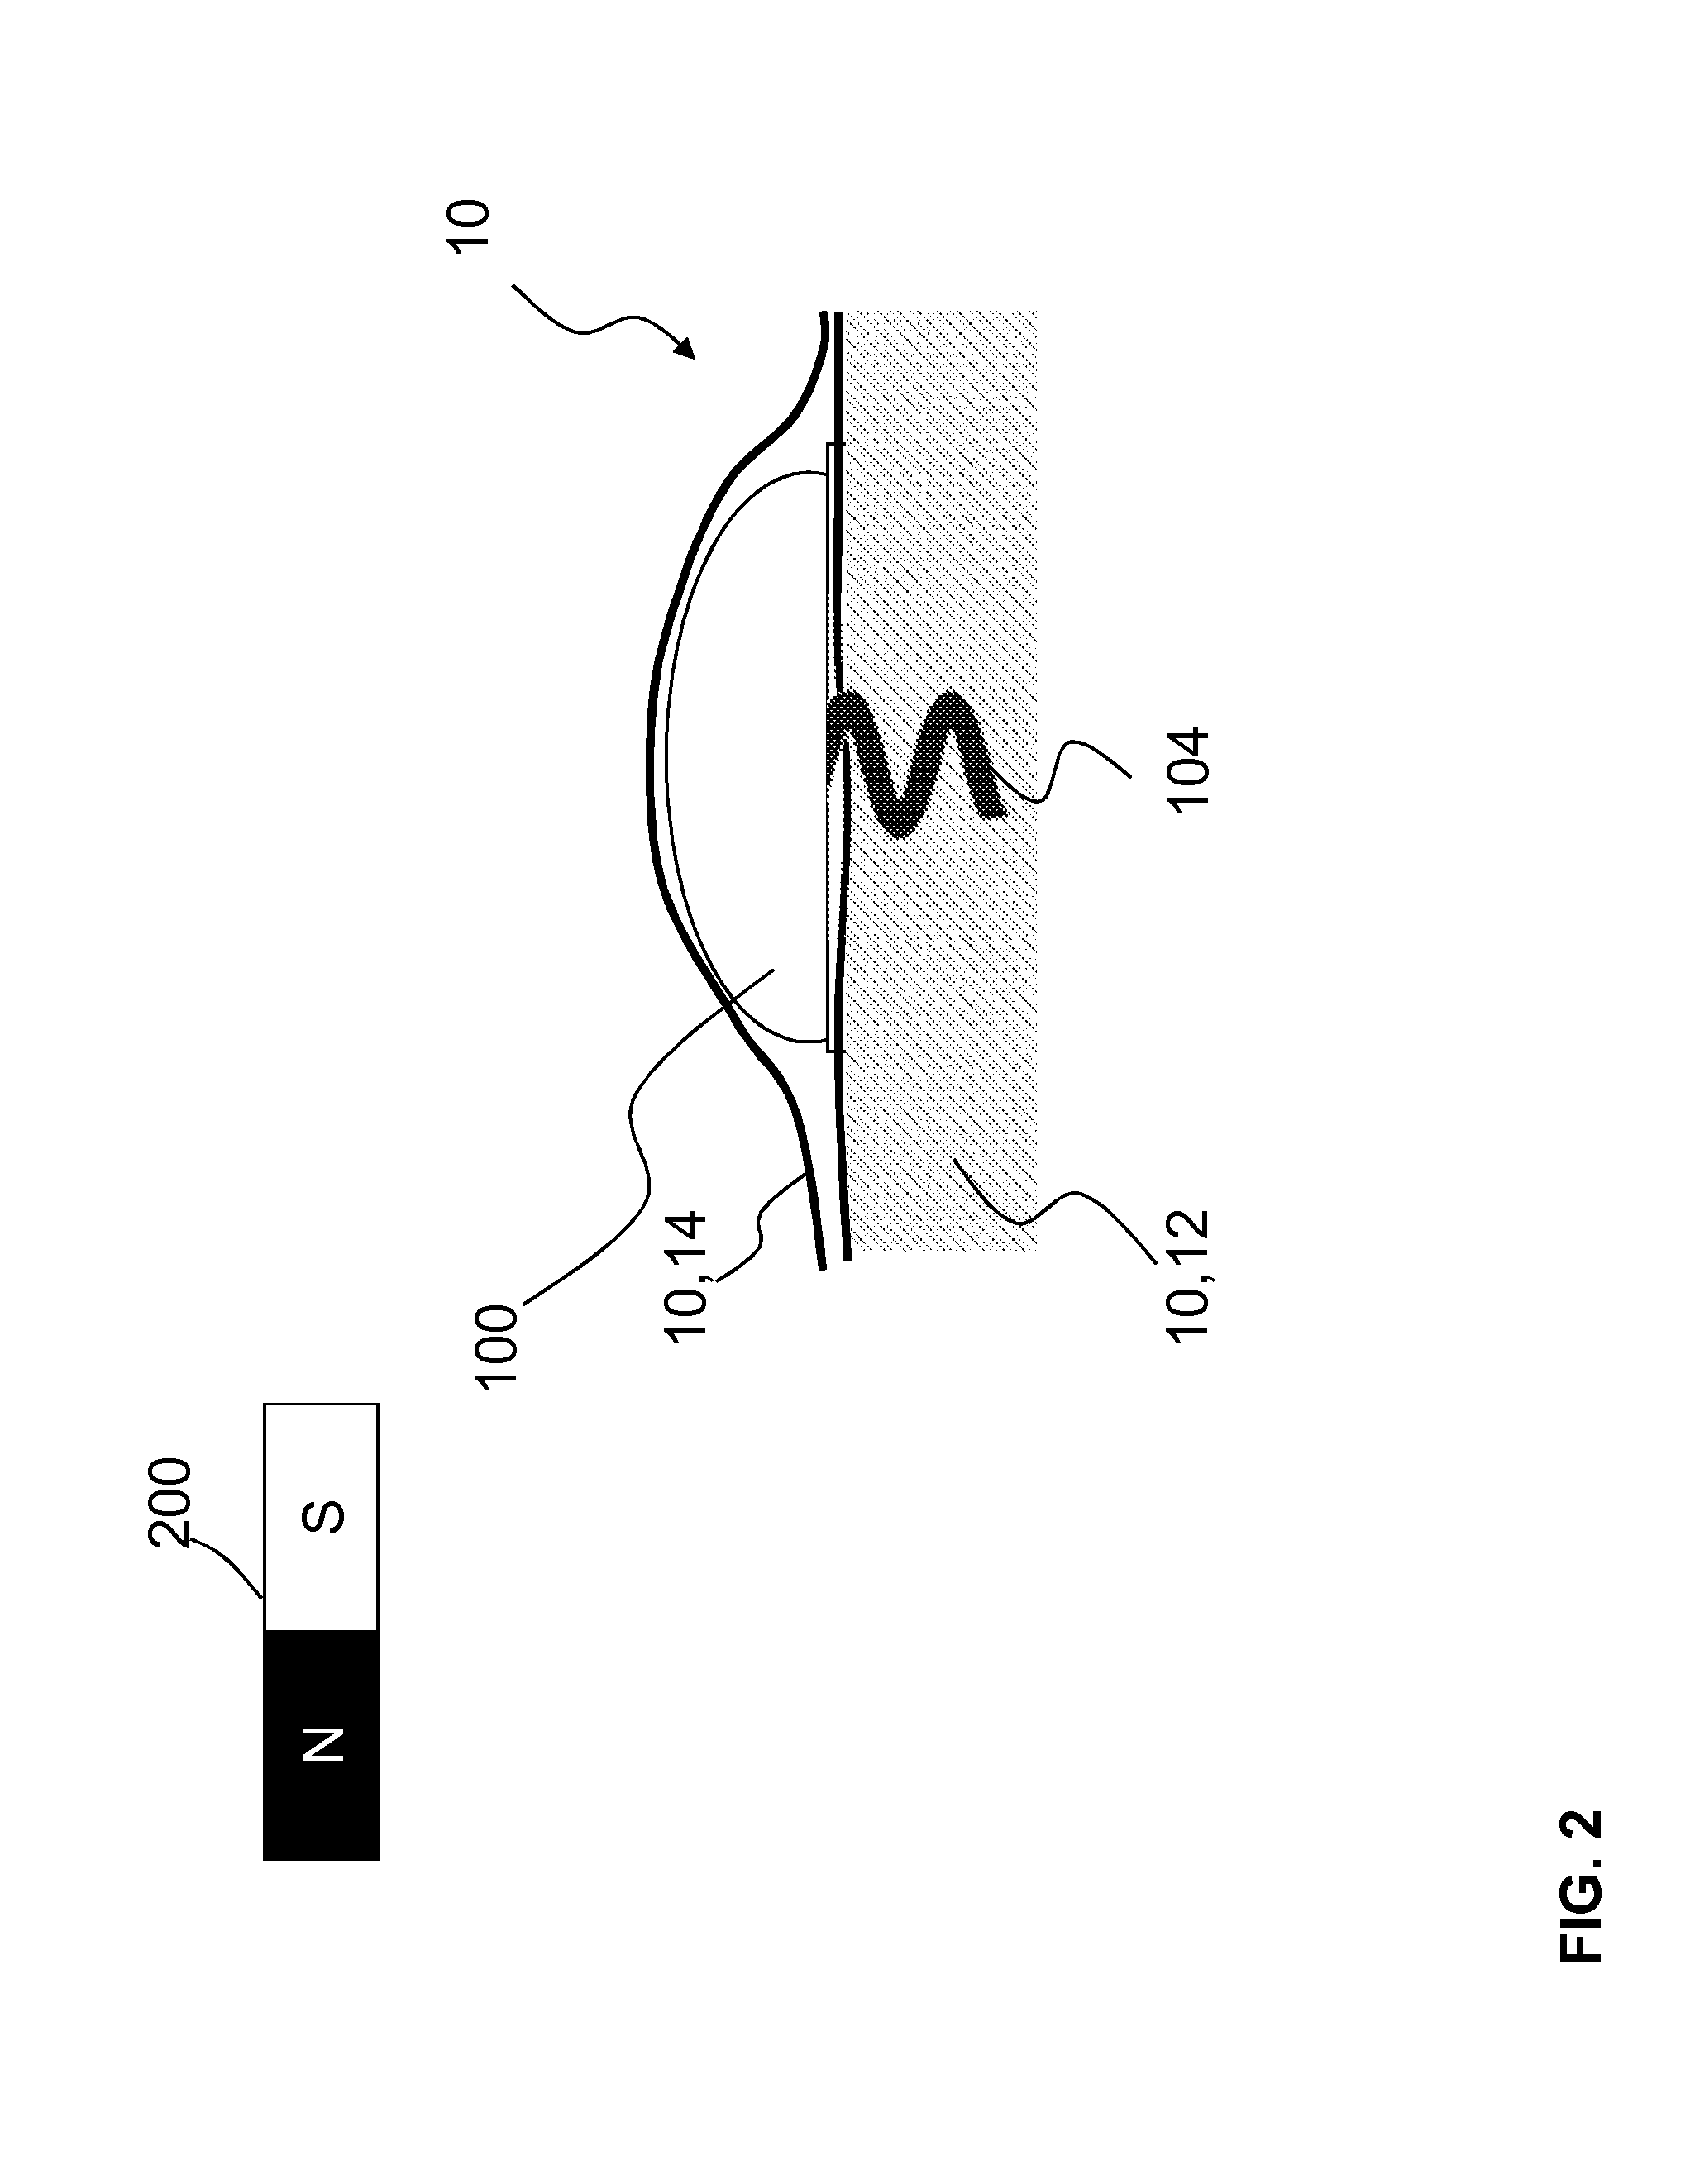 Medical implant with a communications interface